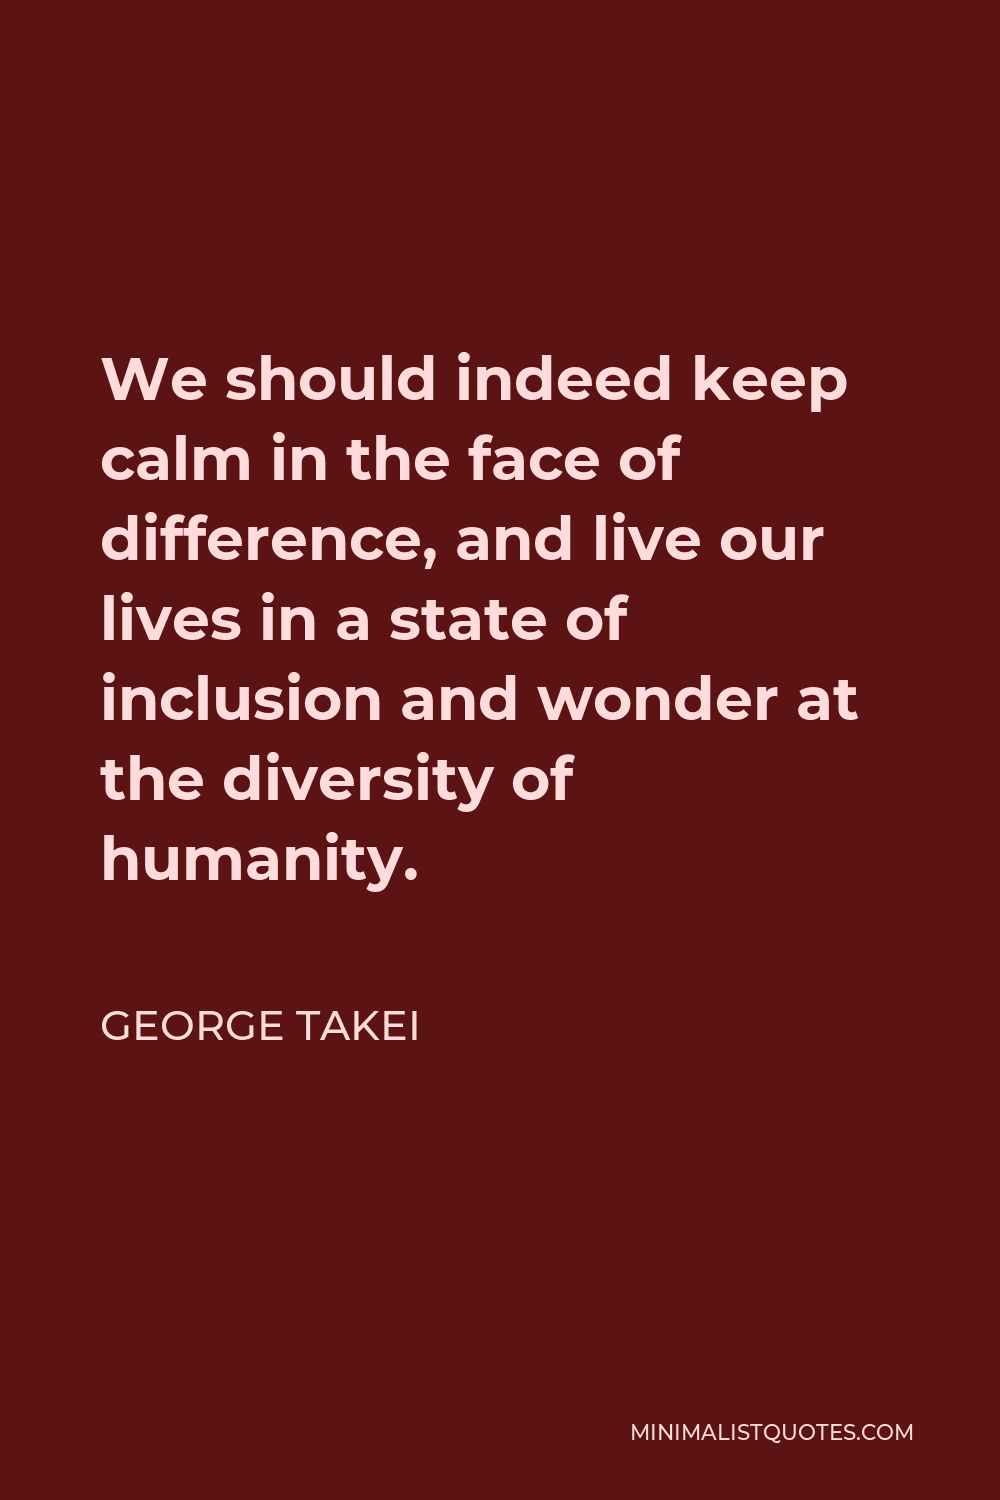 George Takei Quote - We should indeed keep calm in the face of difference, and live our lives in a state of inclusion and wonder at the diversity of humanity.